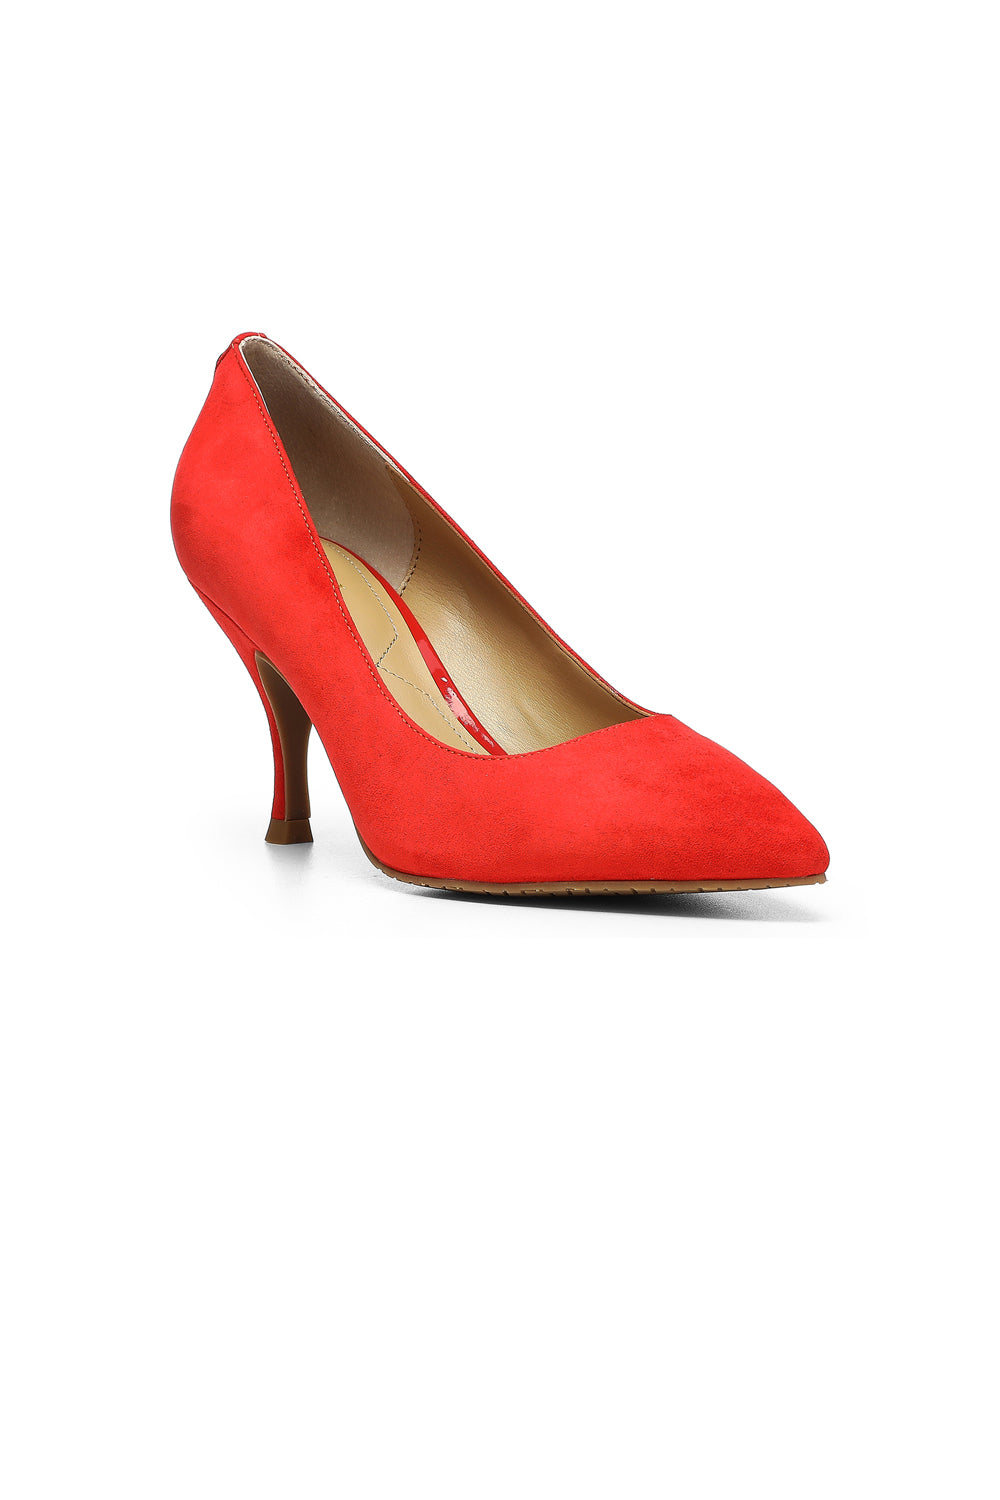 Evie Pumps In Kid Suede - Chili Red | NYDJ